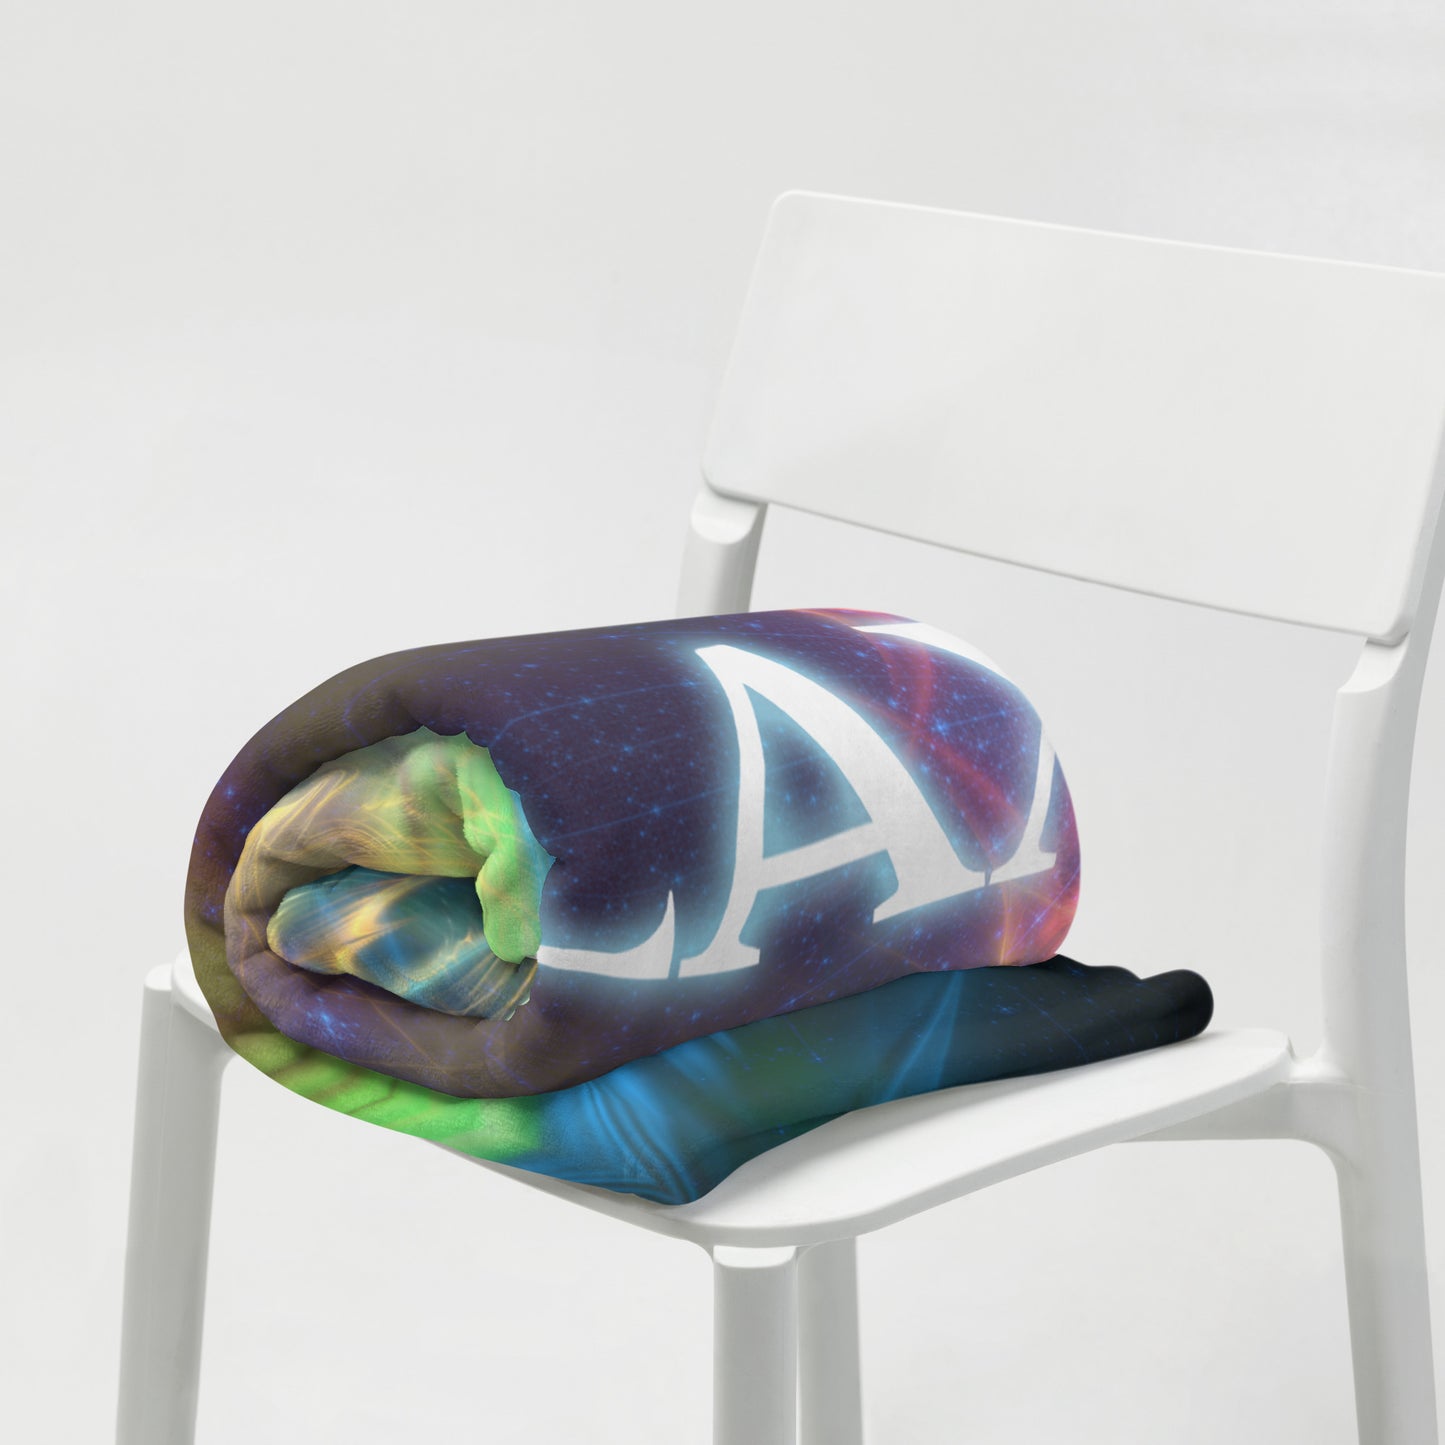 "Relax" - Fractal Typography THROW BLANKET